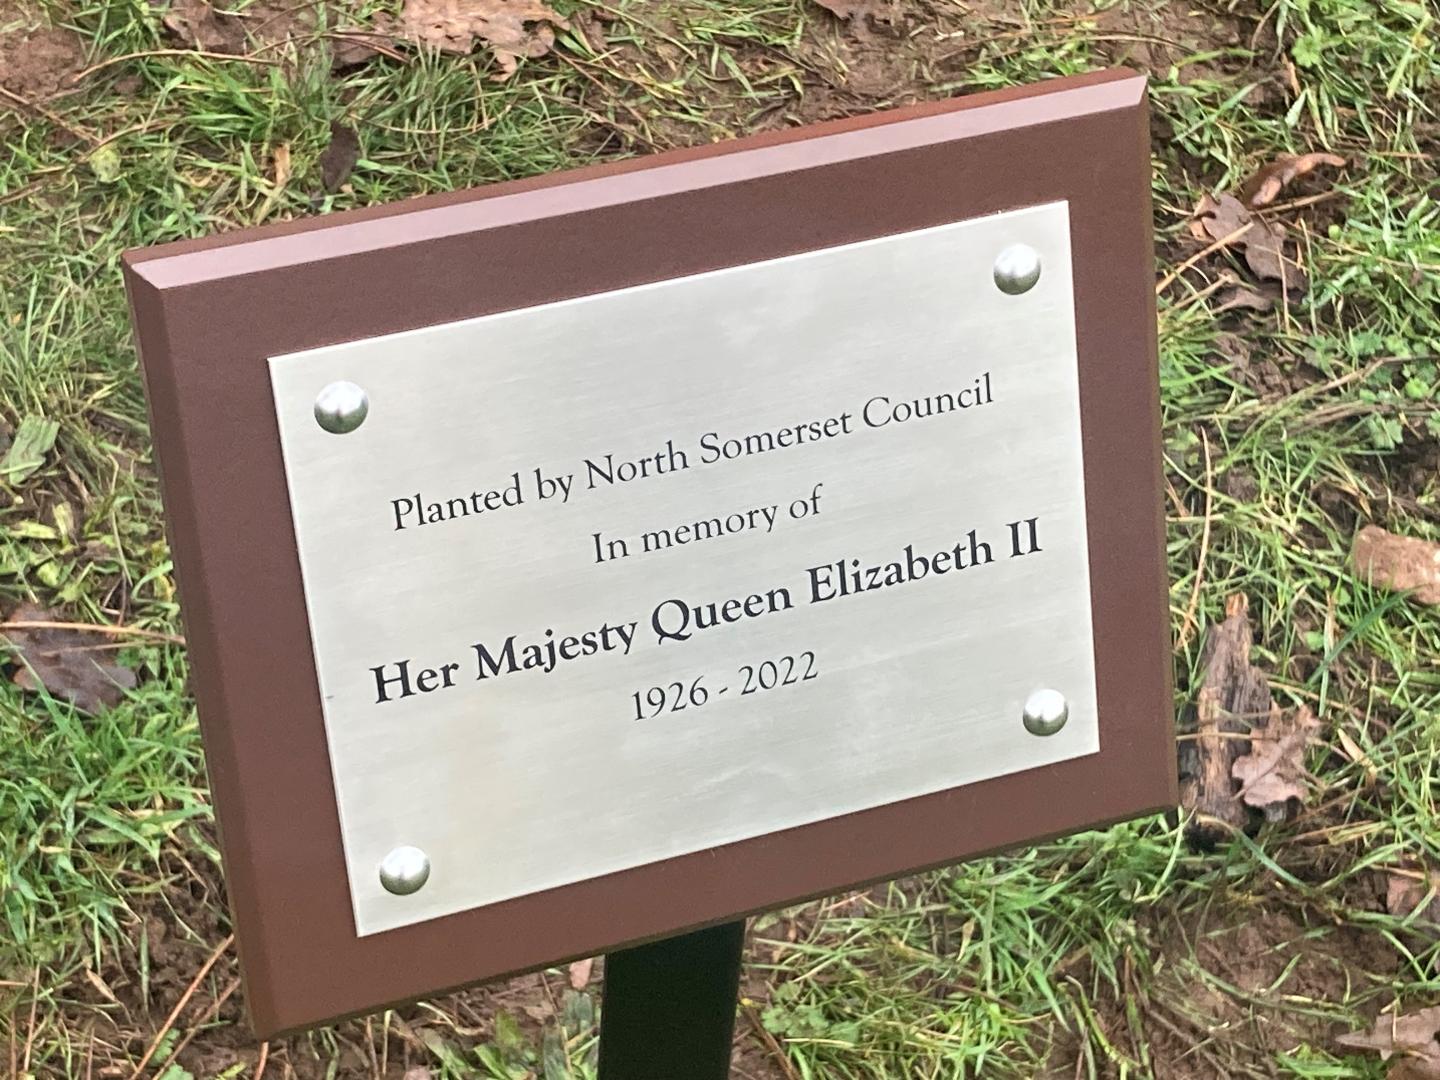 A plaque installed next to an oak tree in Ashcombe Park, Weston-super-Mare that reads Planted by North Somerset Council in memory of Her Majesty Queen Elizabeth II 1926-2022